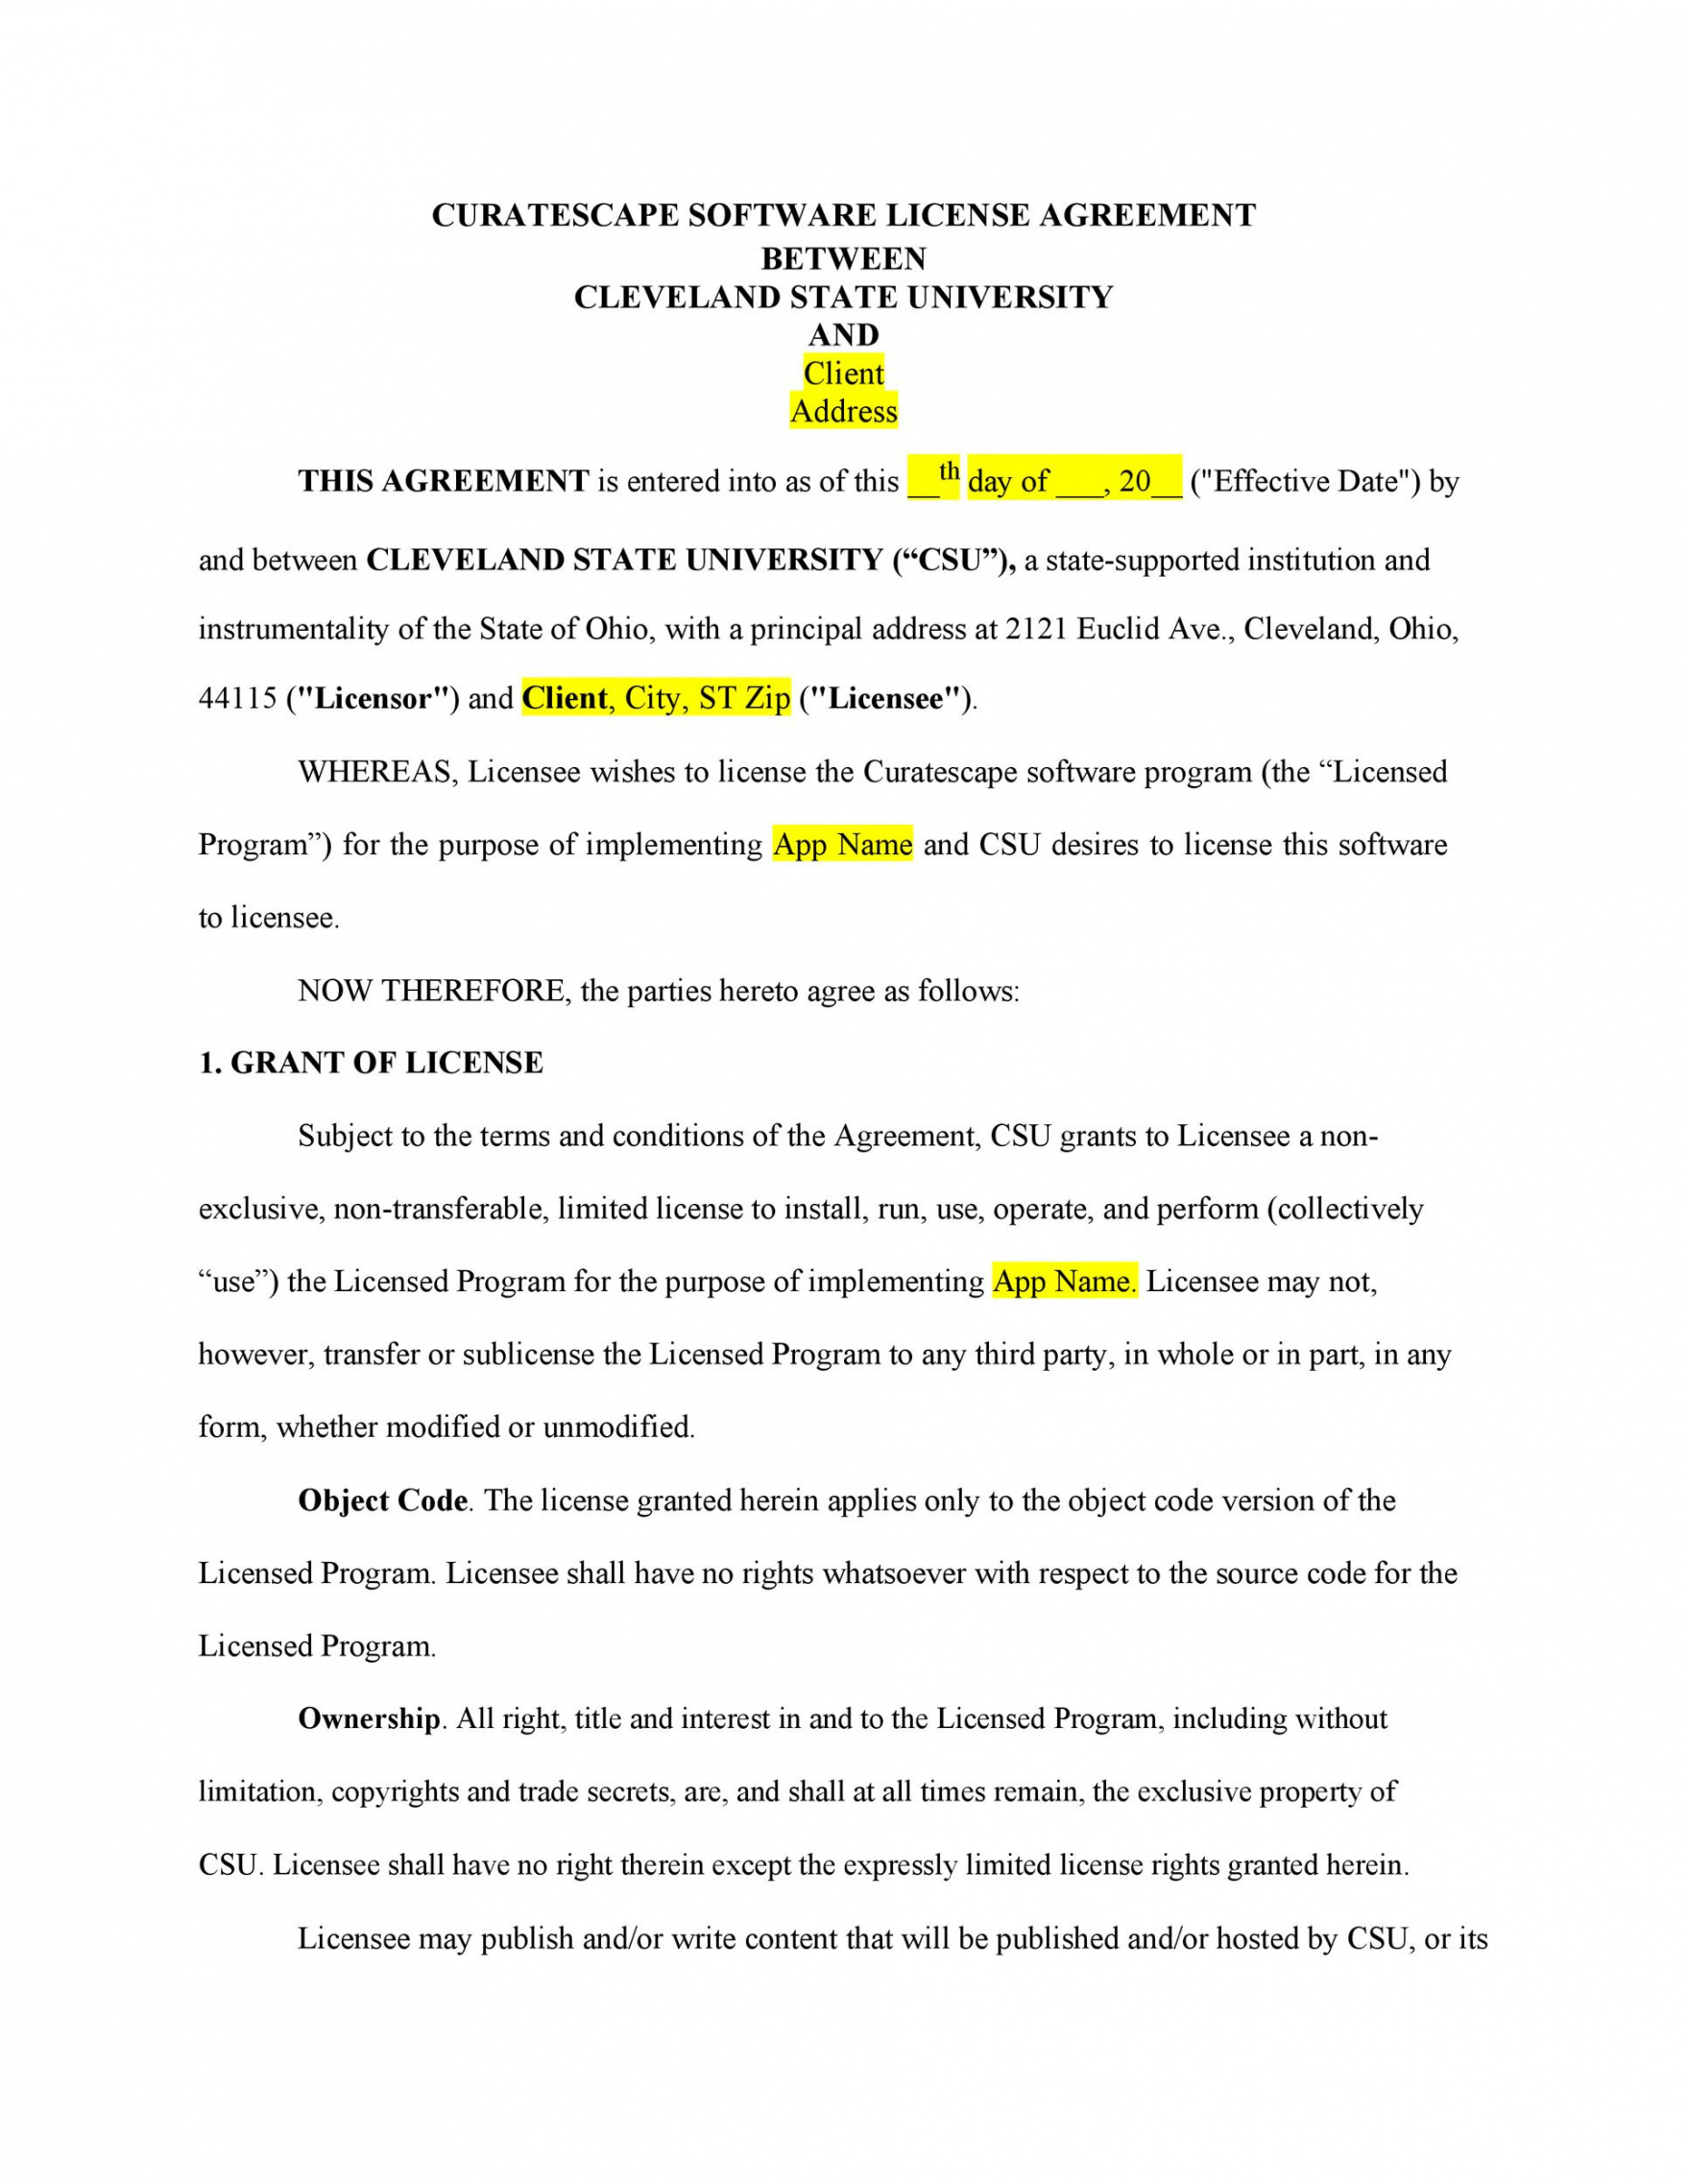 50 professional license agreement templates ᐅ templatelab software licensing agreement template free example